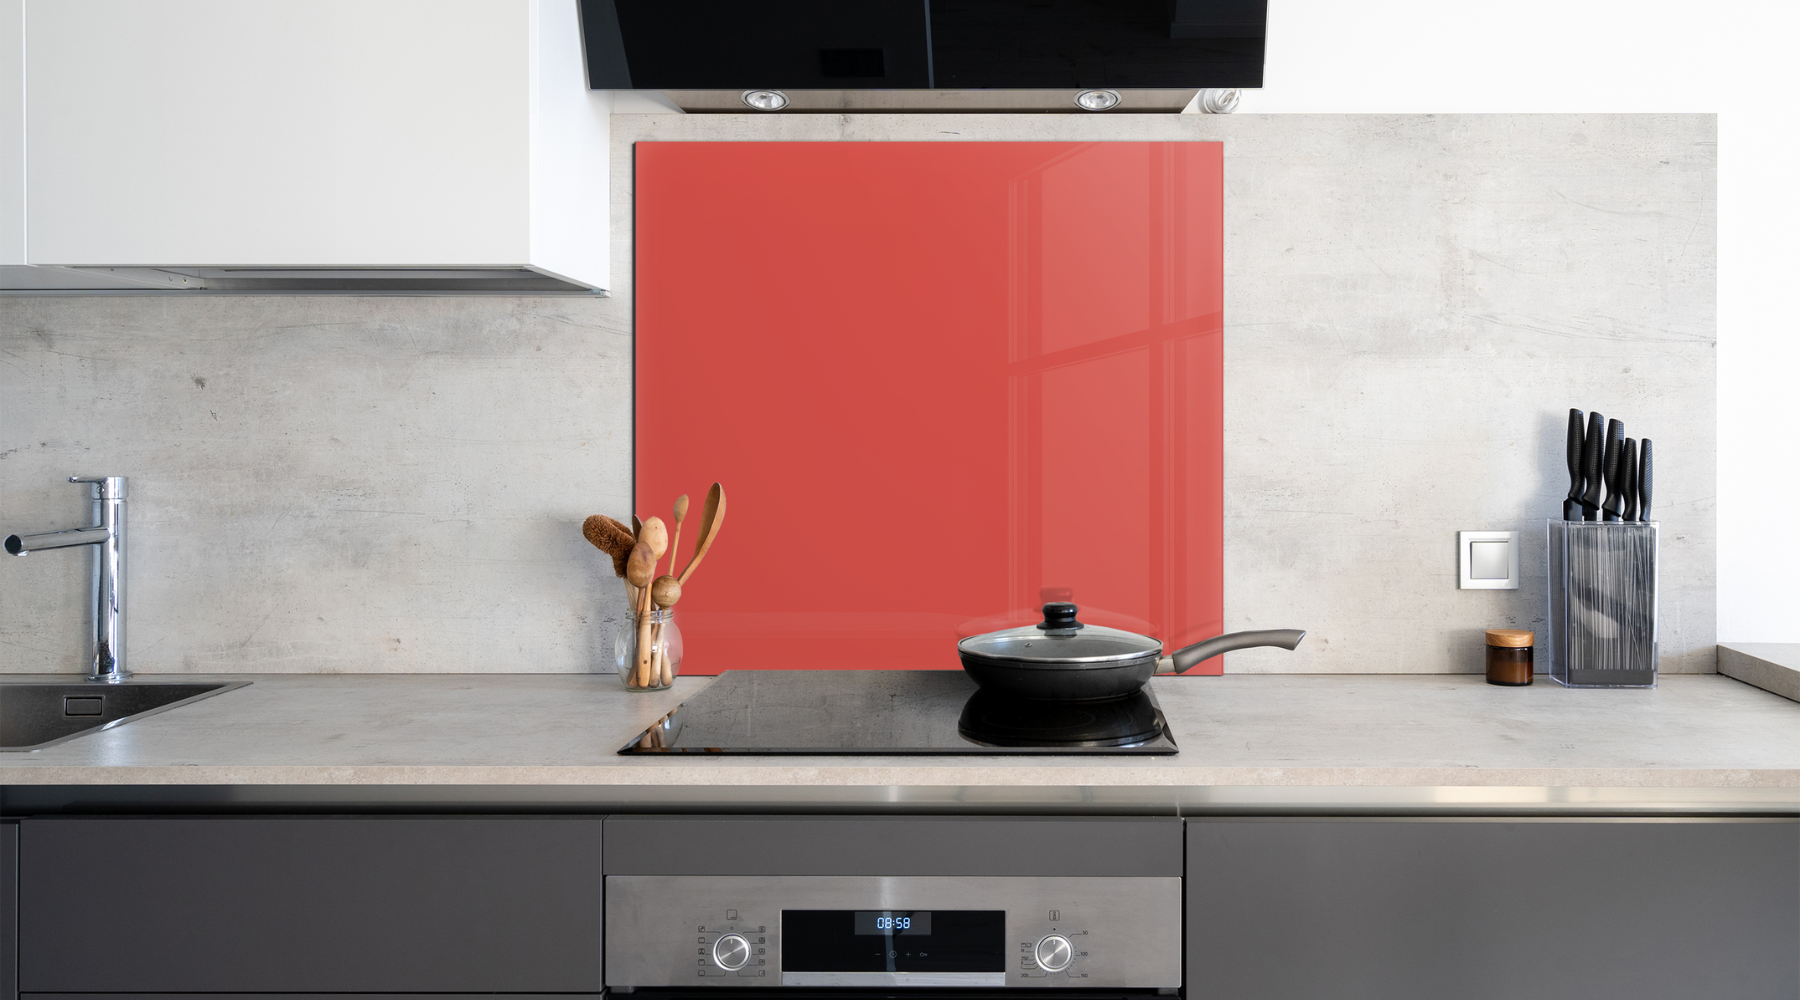 A square red glass painted backsplash behind modern electric hob in a clean kitchen space.